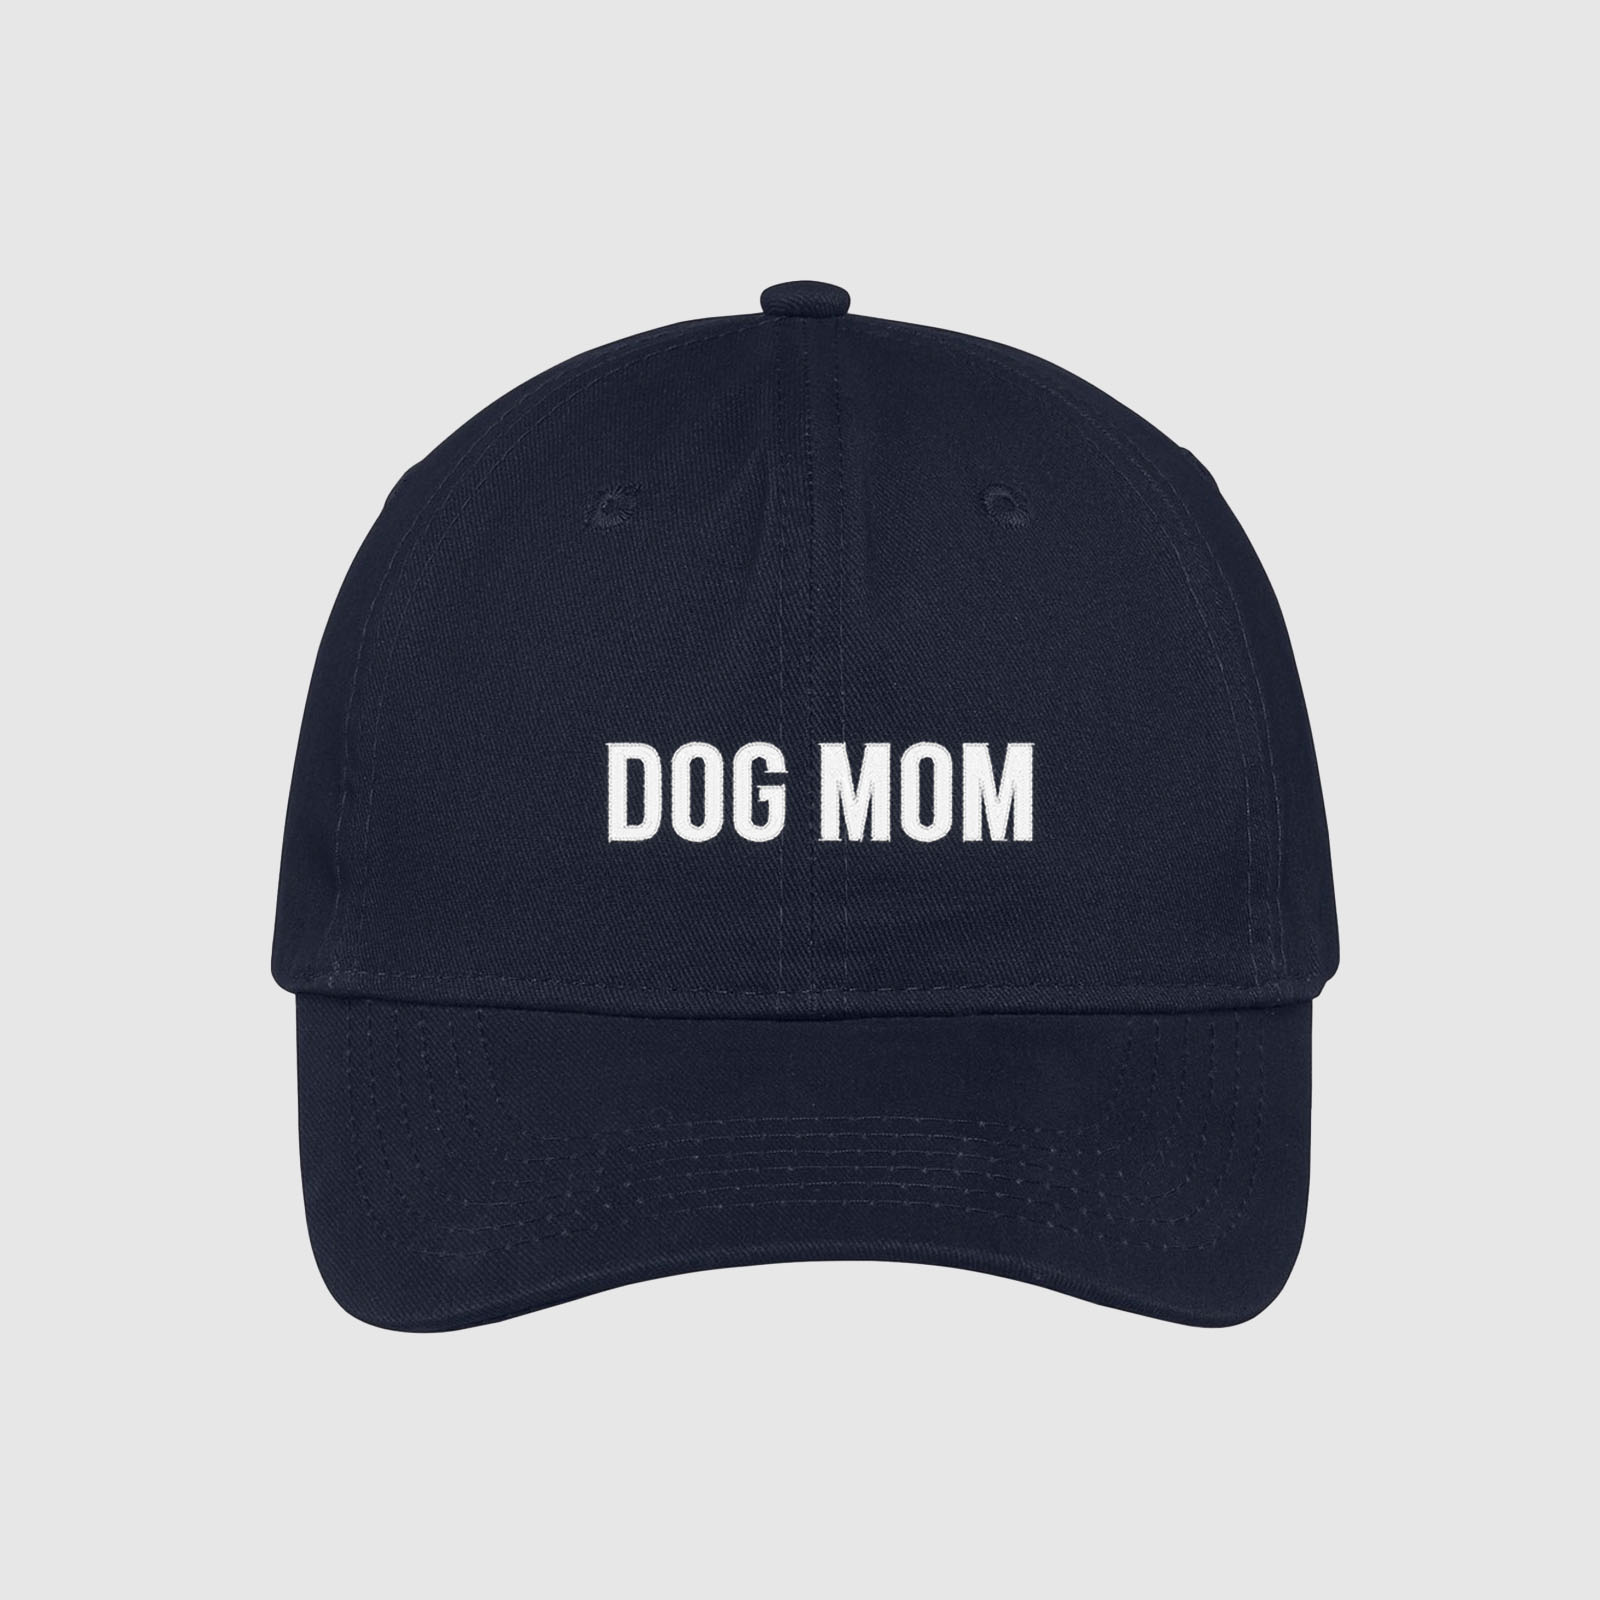 Navy Dog Mom Hat embroidered with white text.